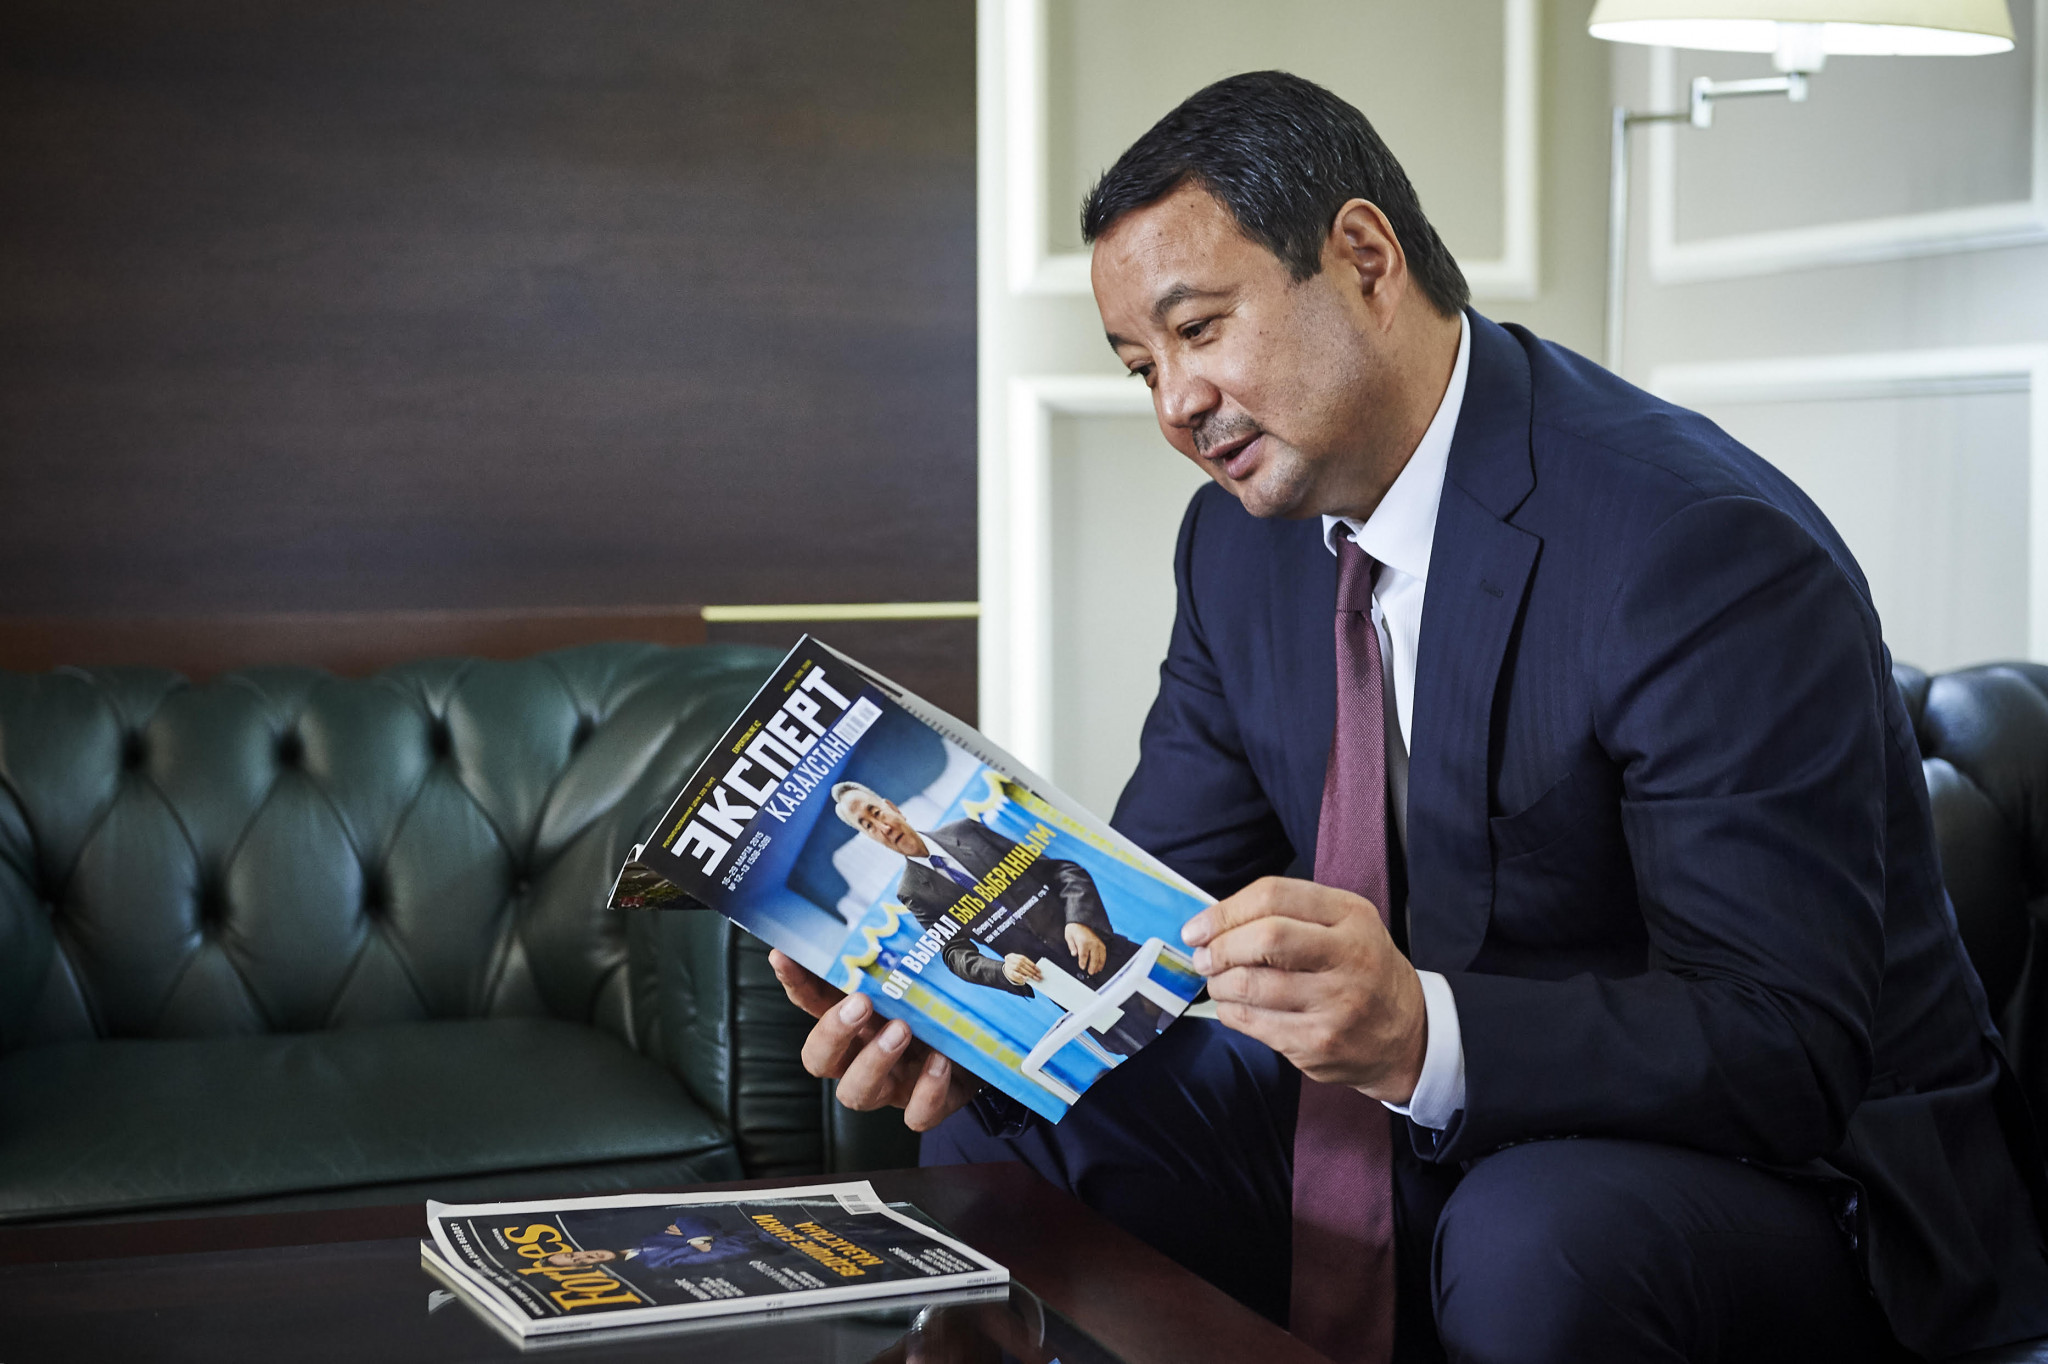 Both England Boxing and Serik Konakbayev, pictured, have called on AIBA to run the upcoming Presidential election in a "fair and completely transparent" way ©ASBC